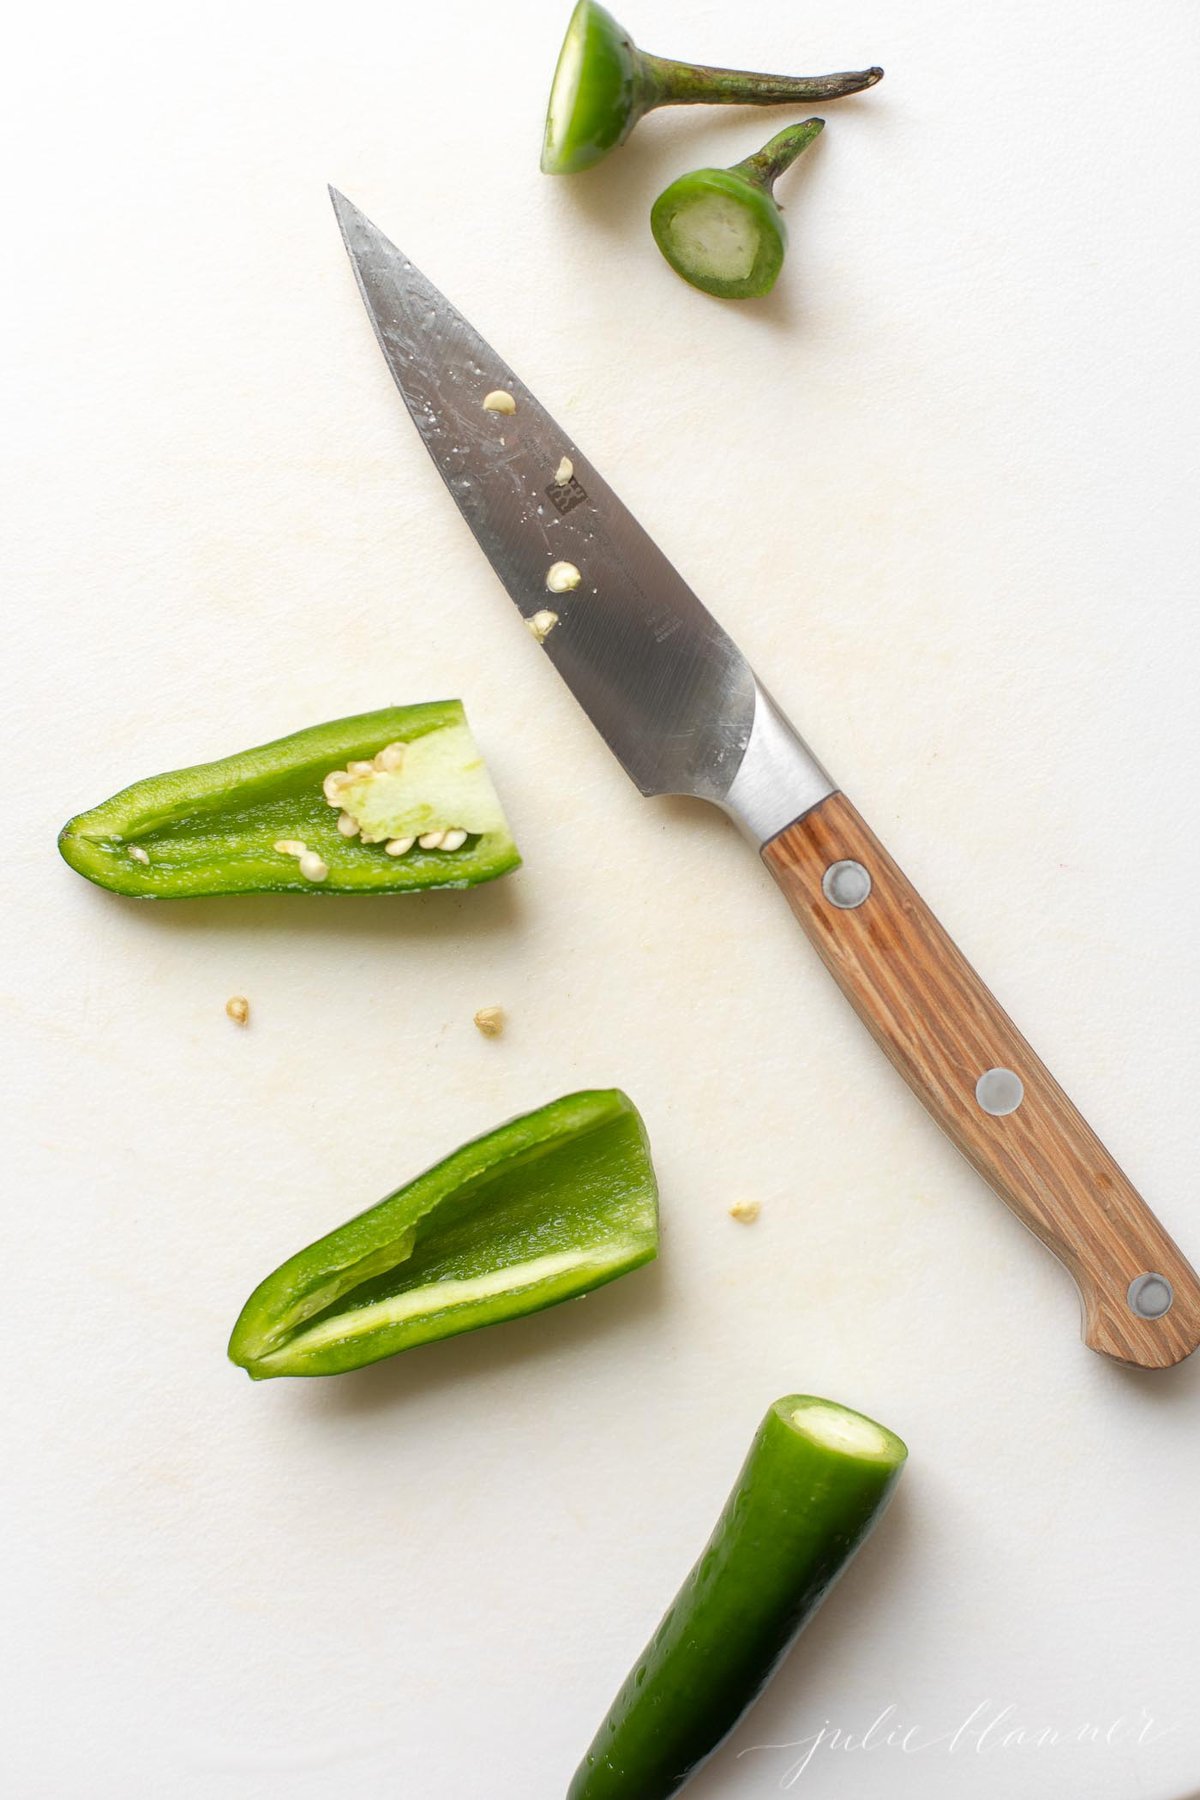 Overhead view of jalapeno peppers on cutting board with paring knife; one pepper has top cut off, the other is cut in half lengthwise